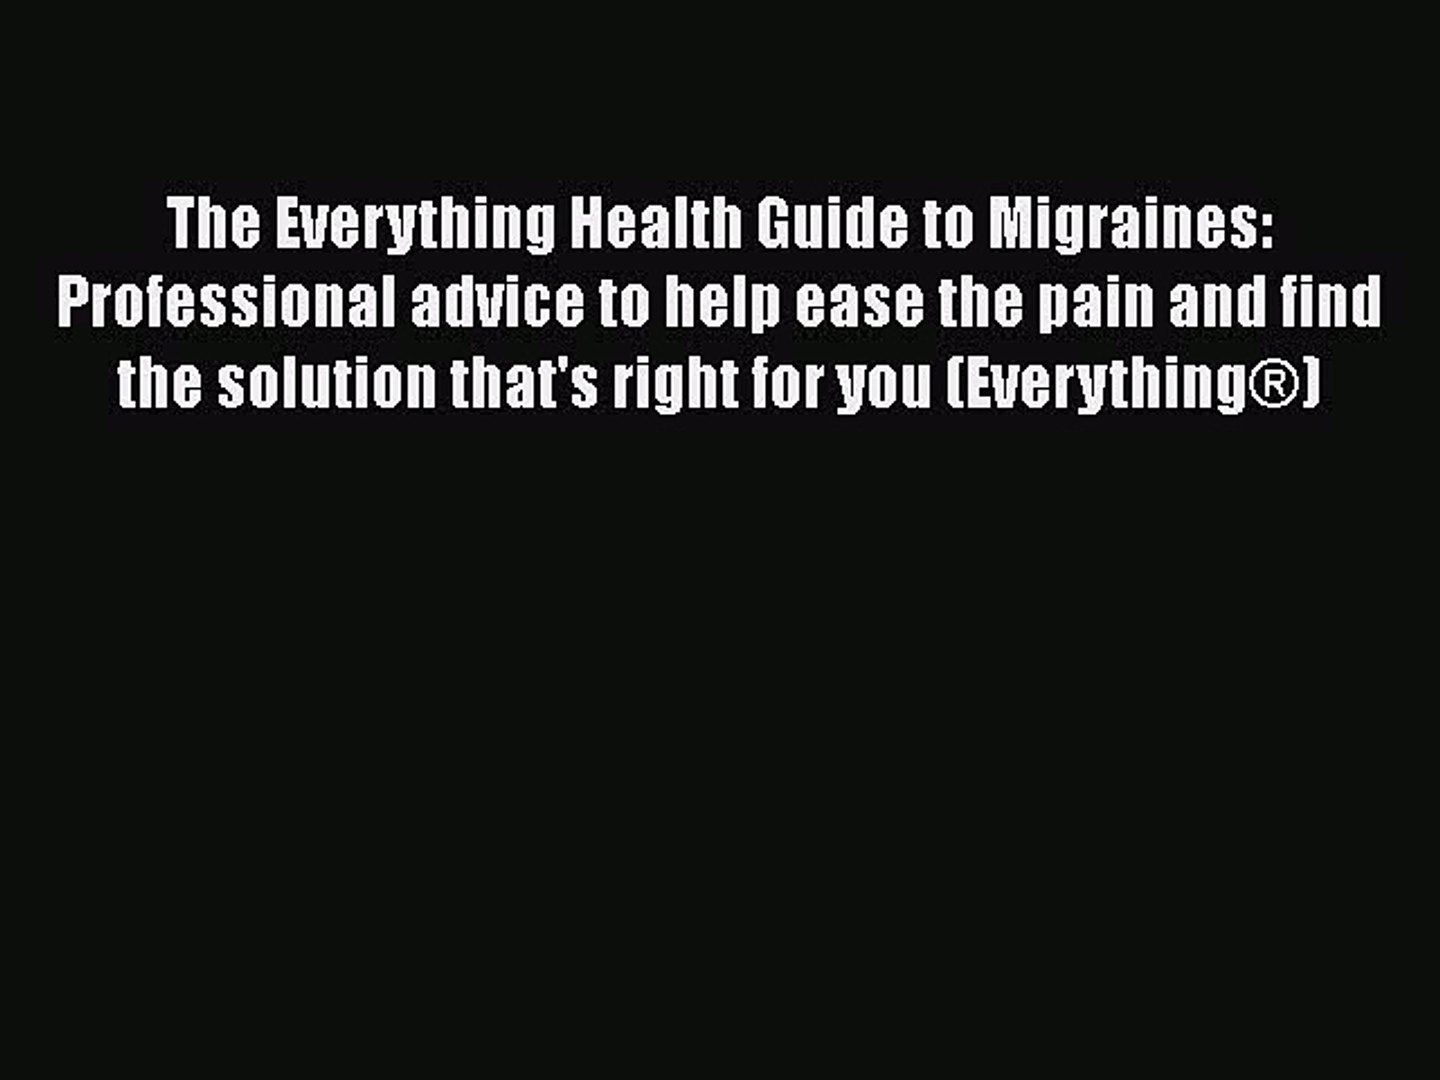 Read The Everything Health Guide to Migraines: Professional advice to help ease the pain and